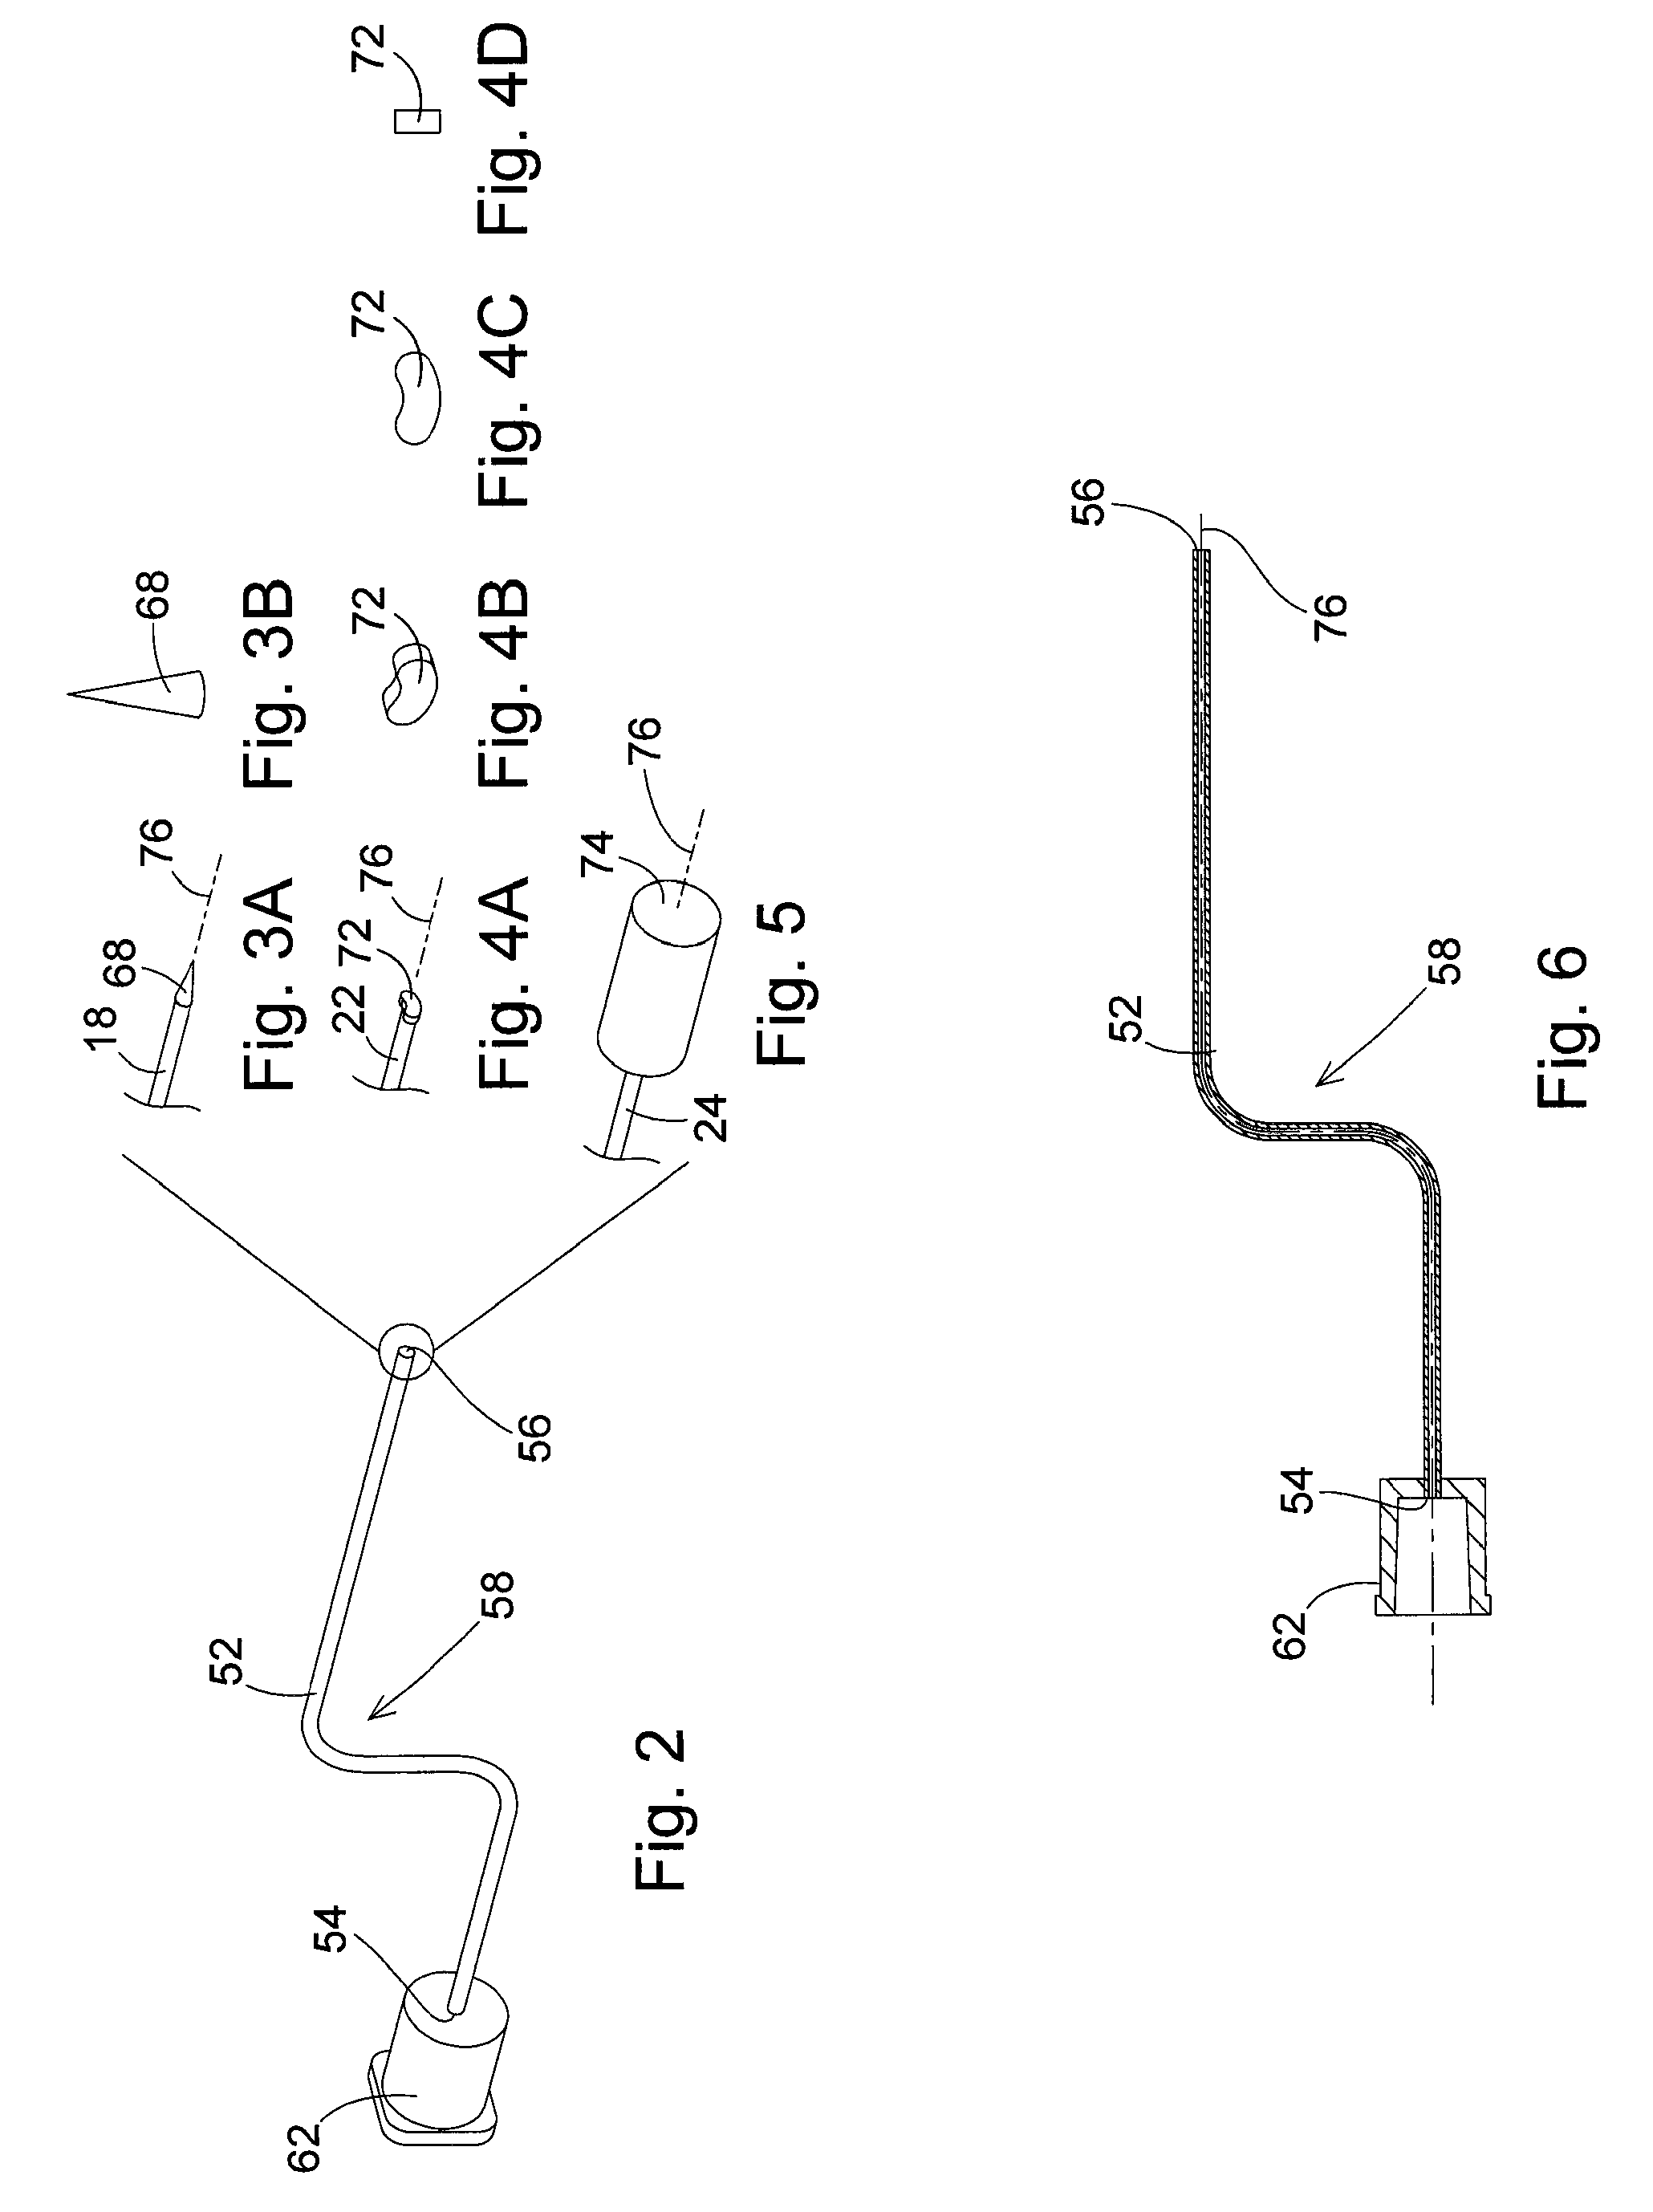 Apparatus and Method for Application of a Pharmaceutical to a Surface of an External Ear Canal for Treatment of Keratosis Obutrans